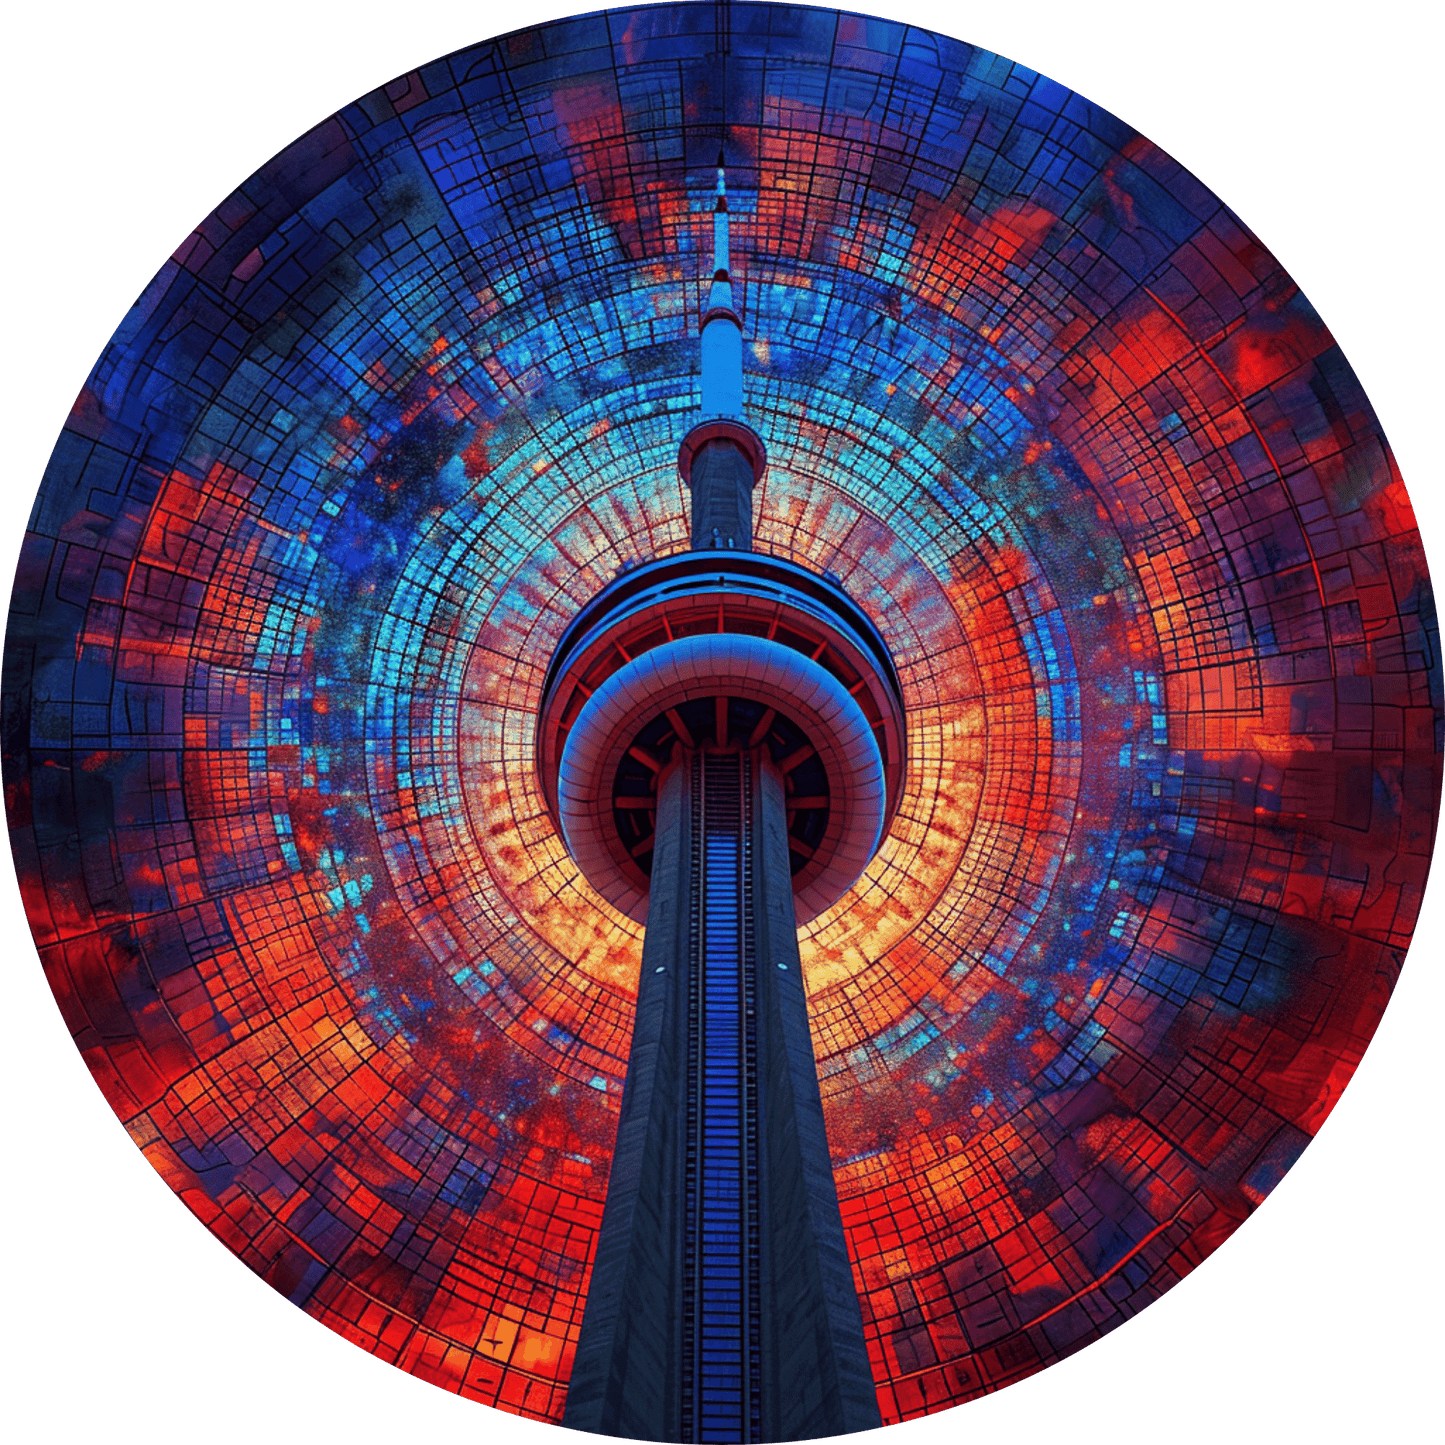 Personalize Your Space - Lux Label Labs' CN Tower Peel-and-Stick Murals